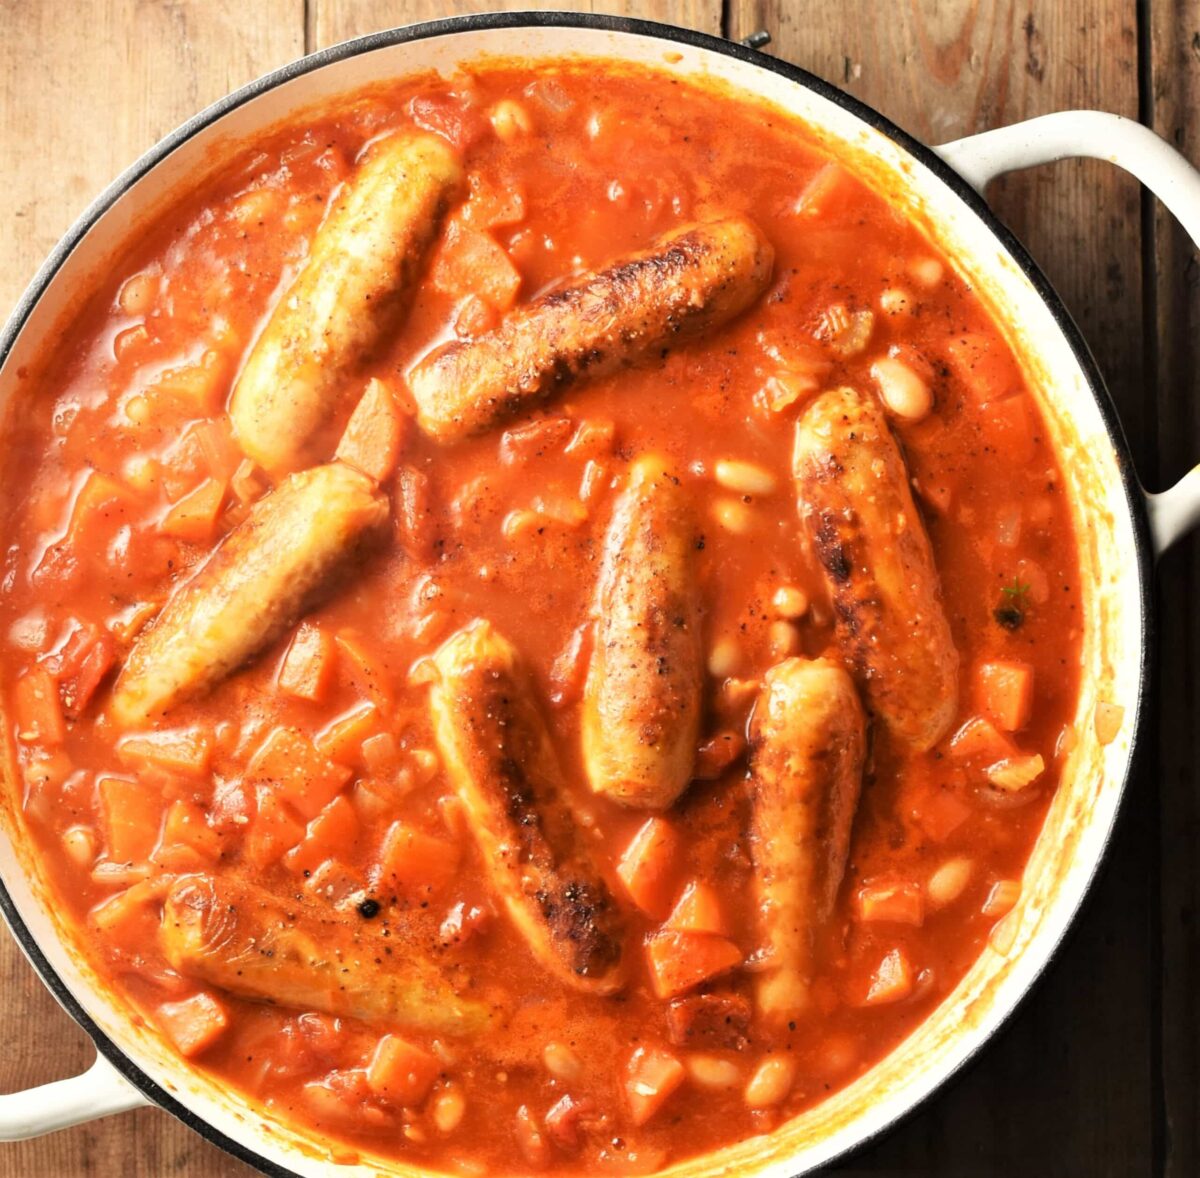 Sausages and beans in tomato sauce in shallow white pan.